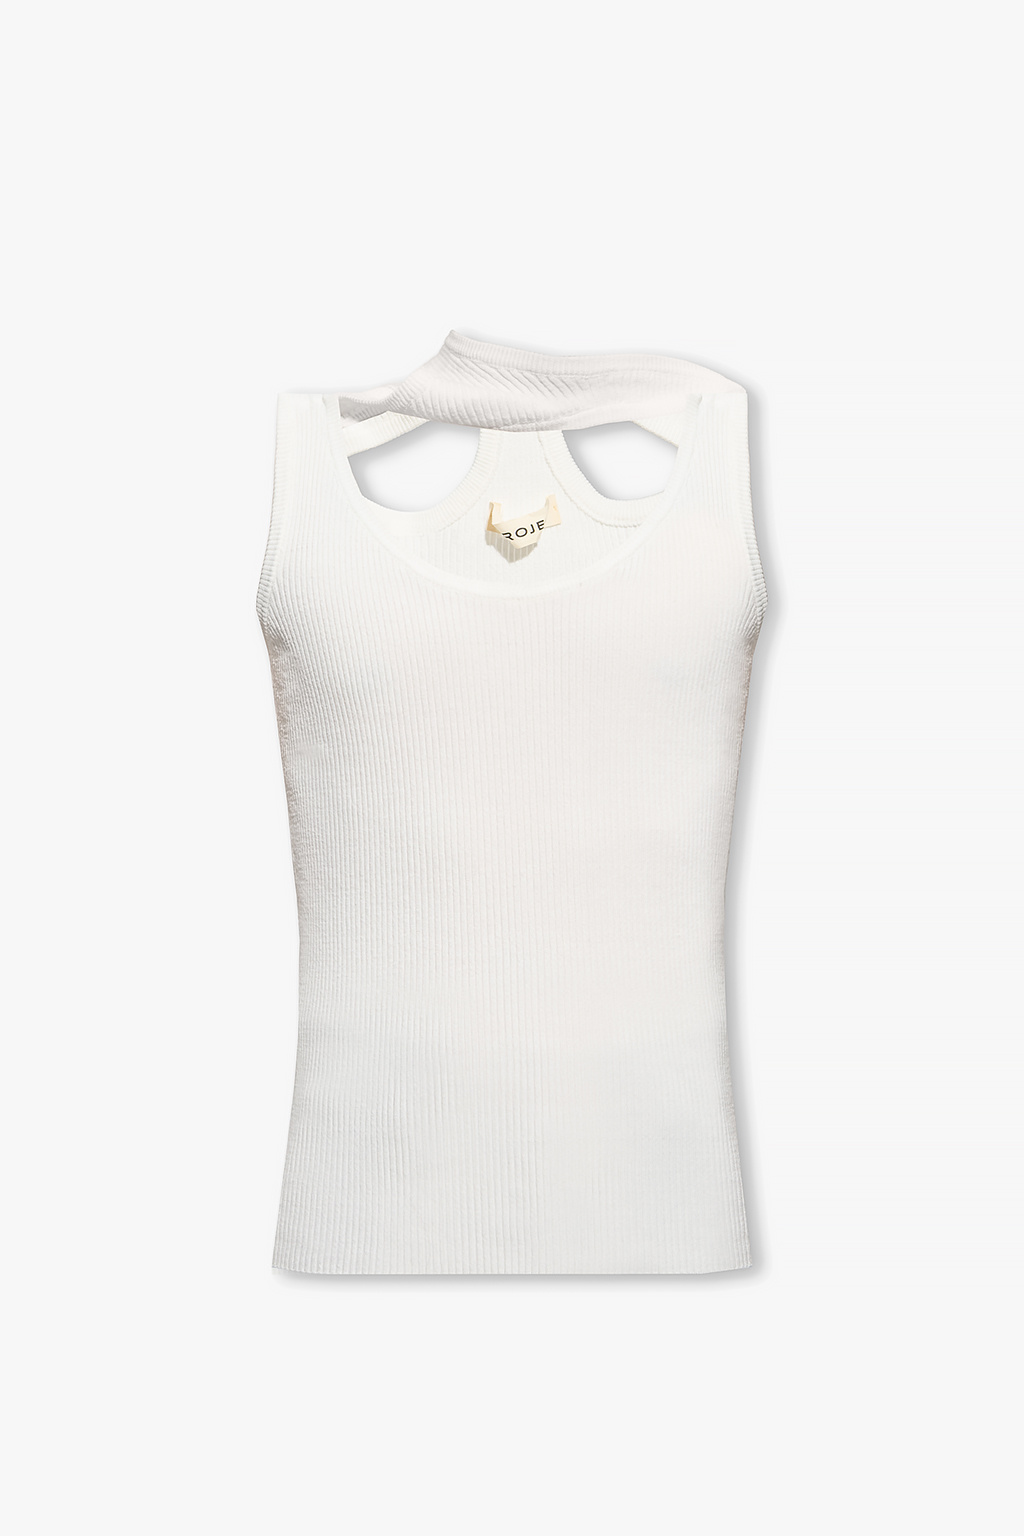 Ladies Sleeveless White Plain Tank Top, Size: S, M and L at Rs 200